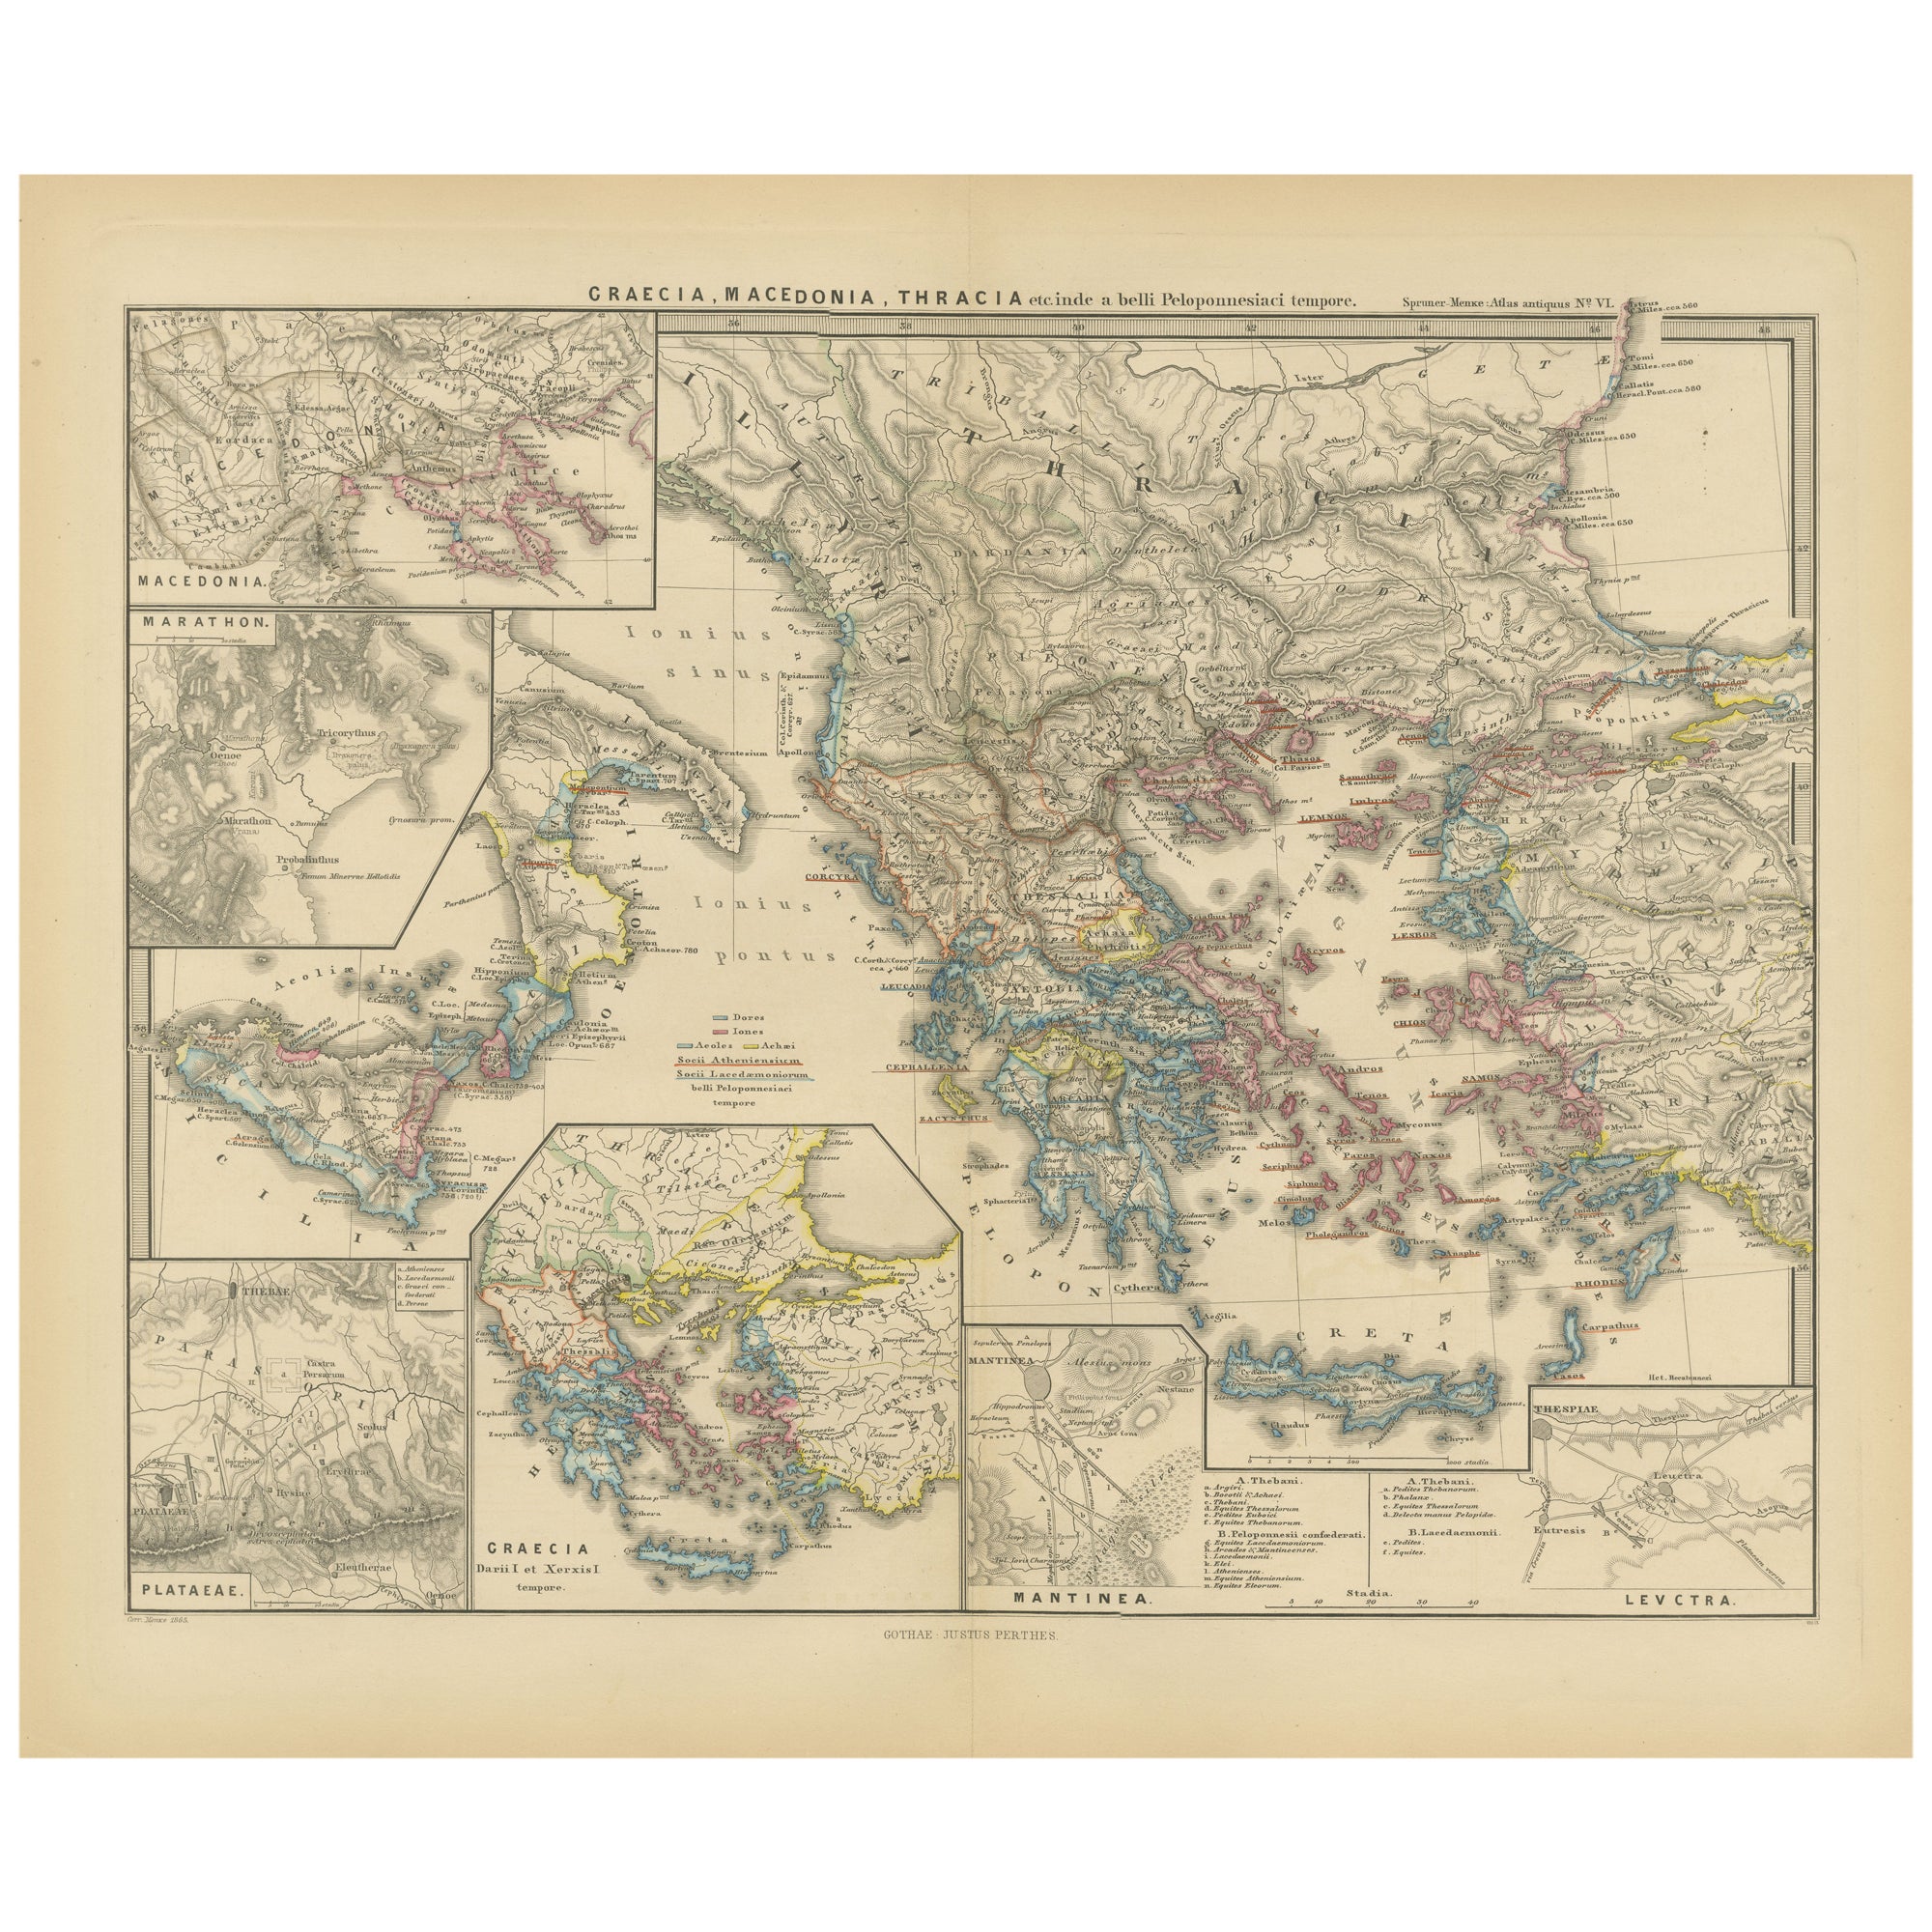 Map of Greece, Macedonia, Thrace from the time of the Peloponnesian War, 1880